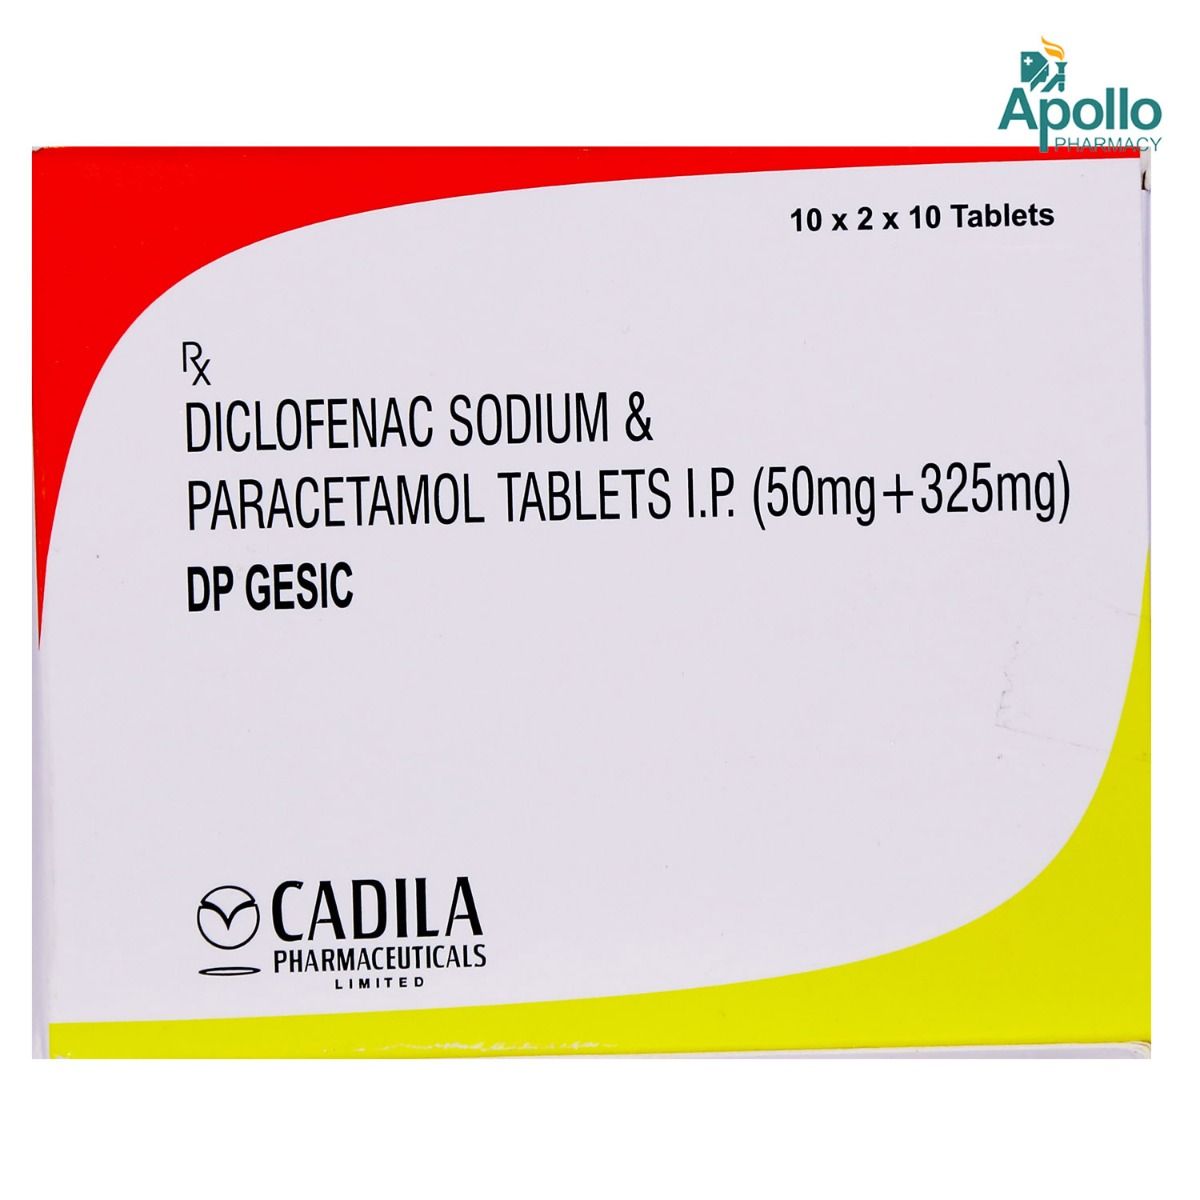 DP Gesic Tablet 10's Price, Uses, Side Effects, Composition ...